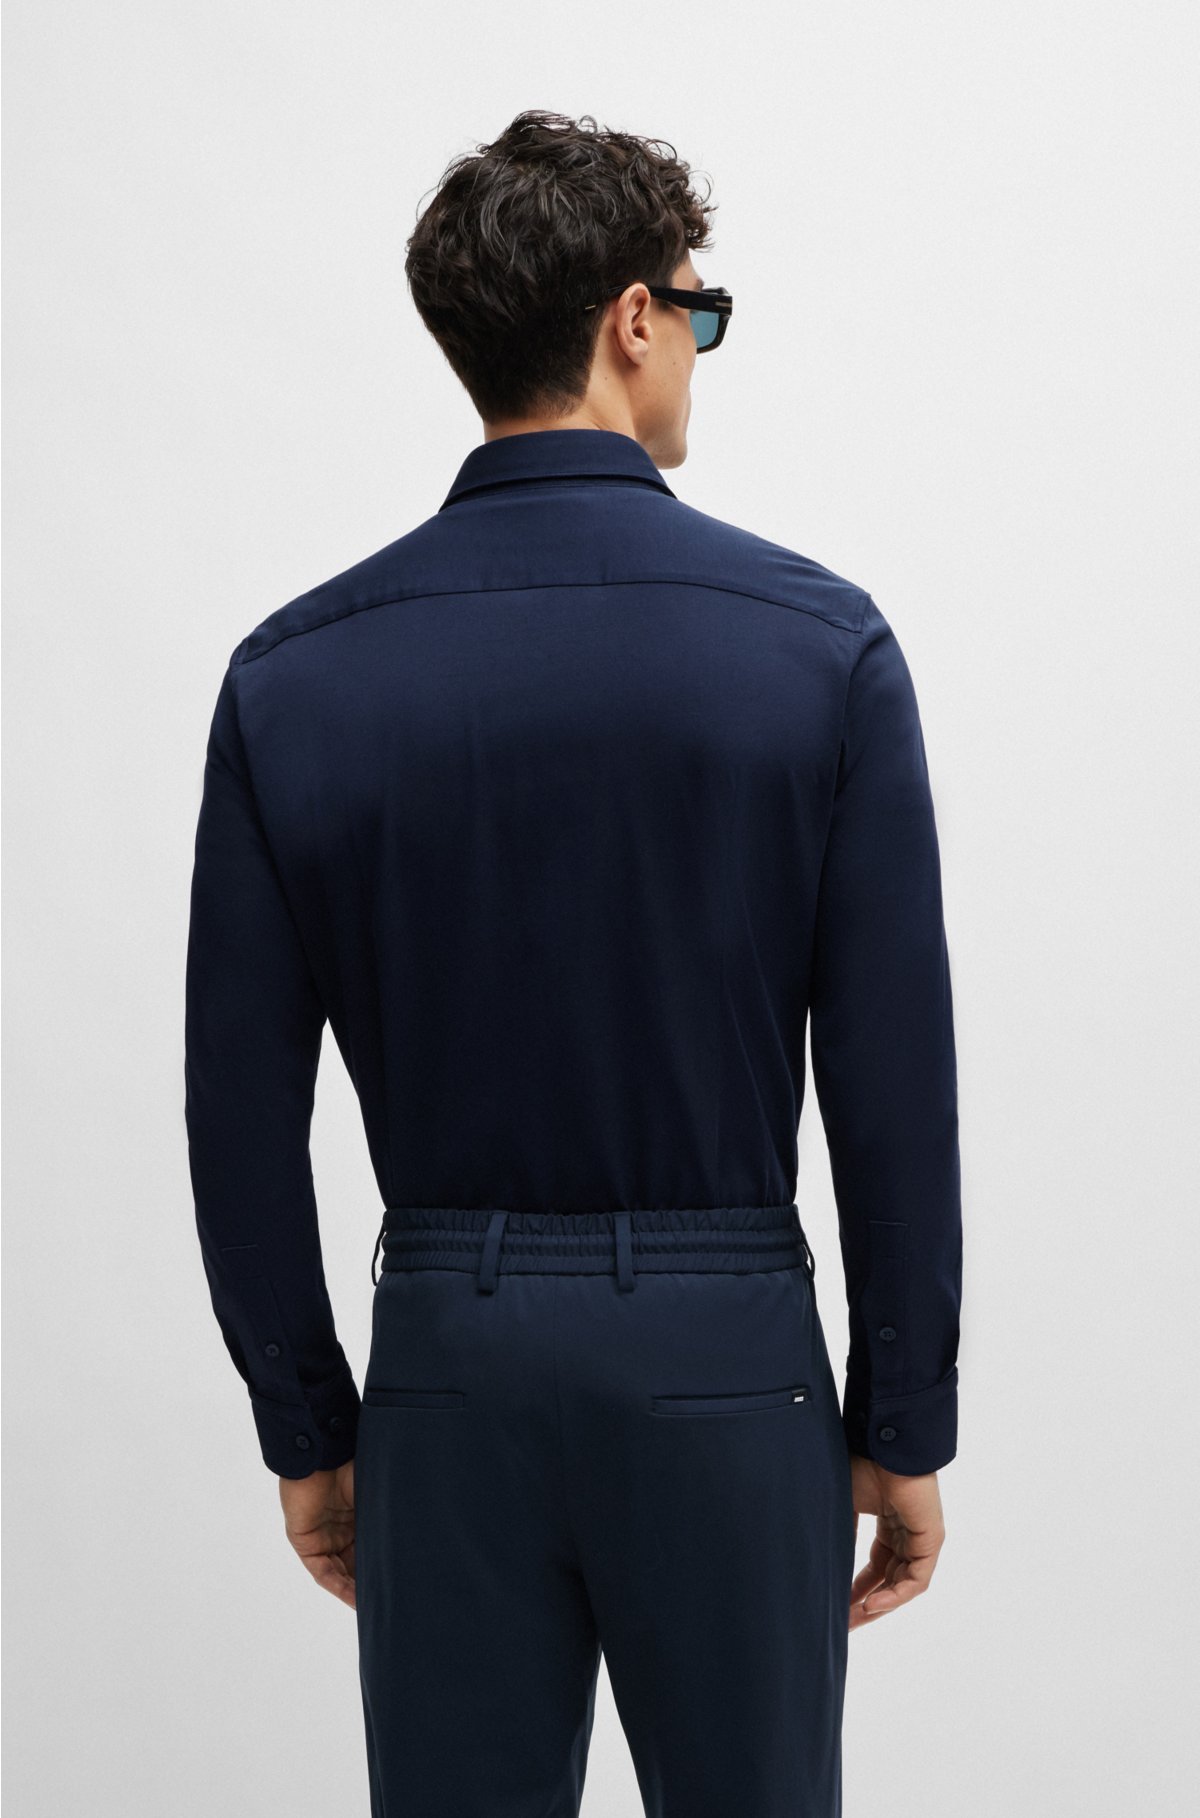 Tailored Fit Long Sleeve Shirt Navy